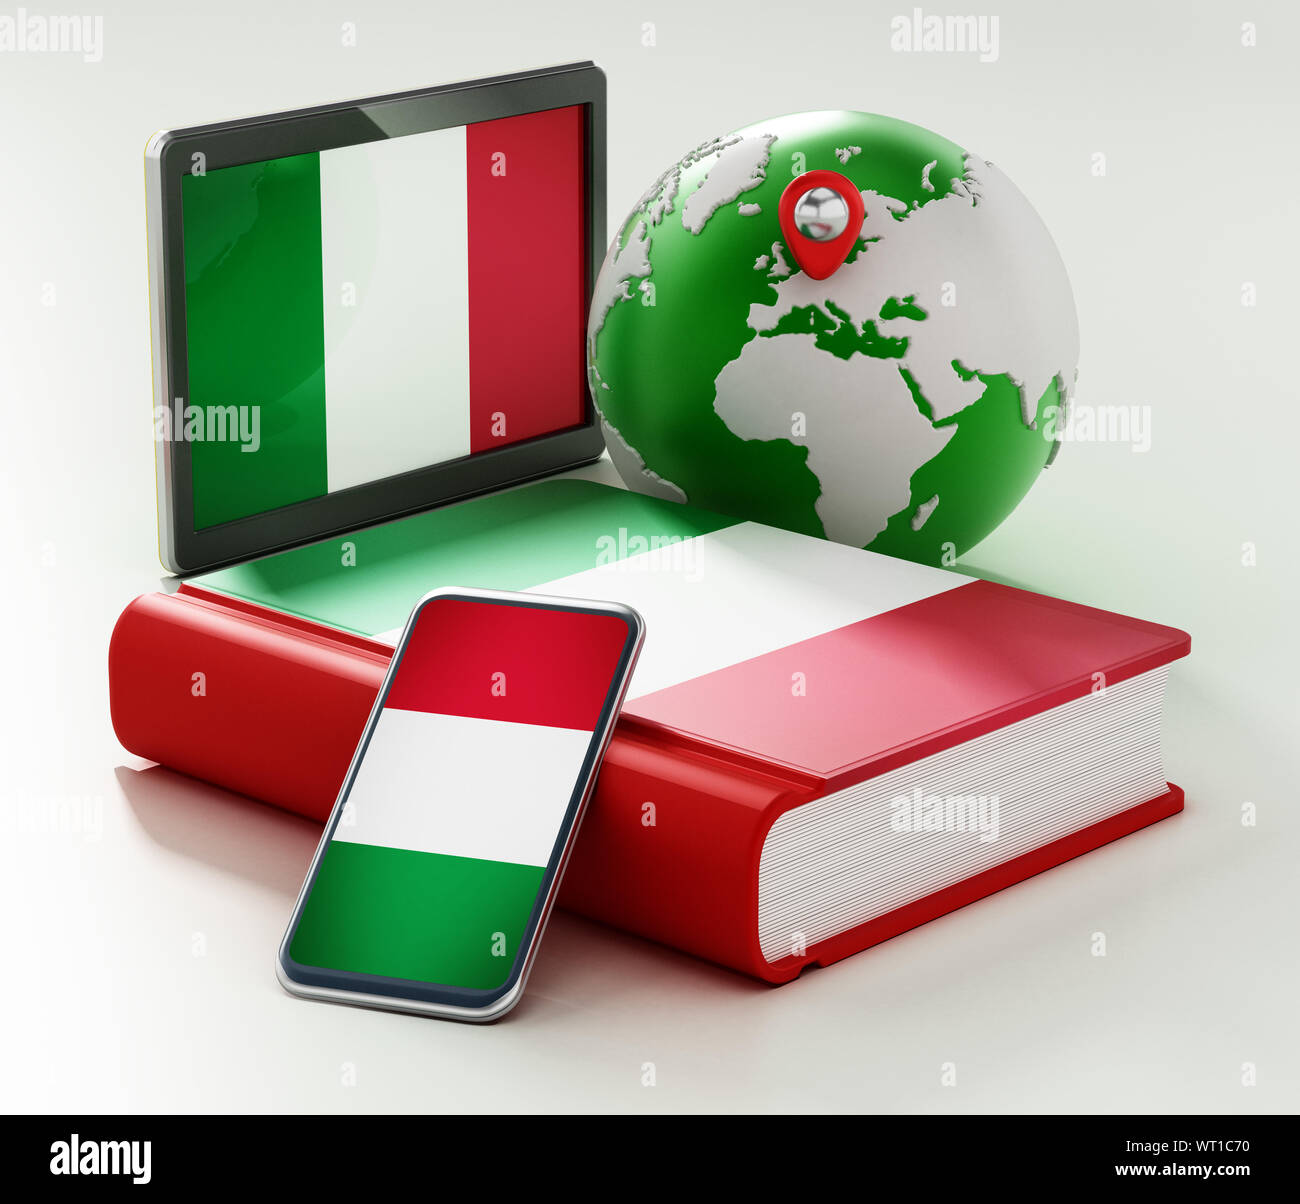 Dictionary, smartphone and tablet pc with Italian flag along the globe. 3D illustration. Stock Photo